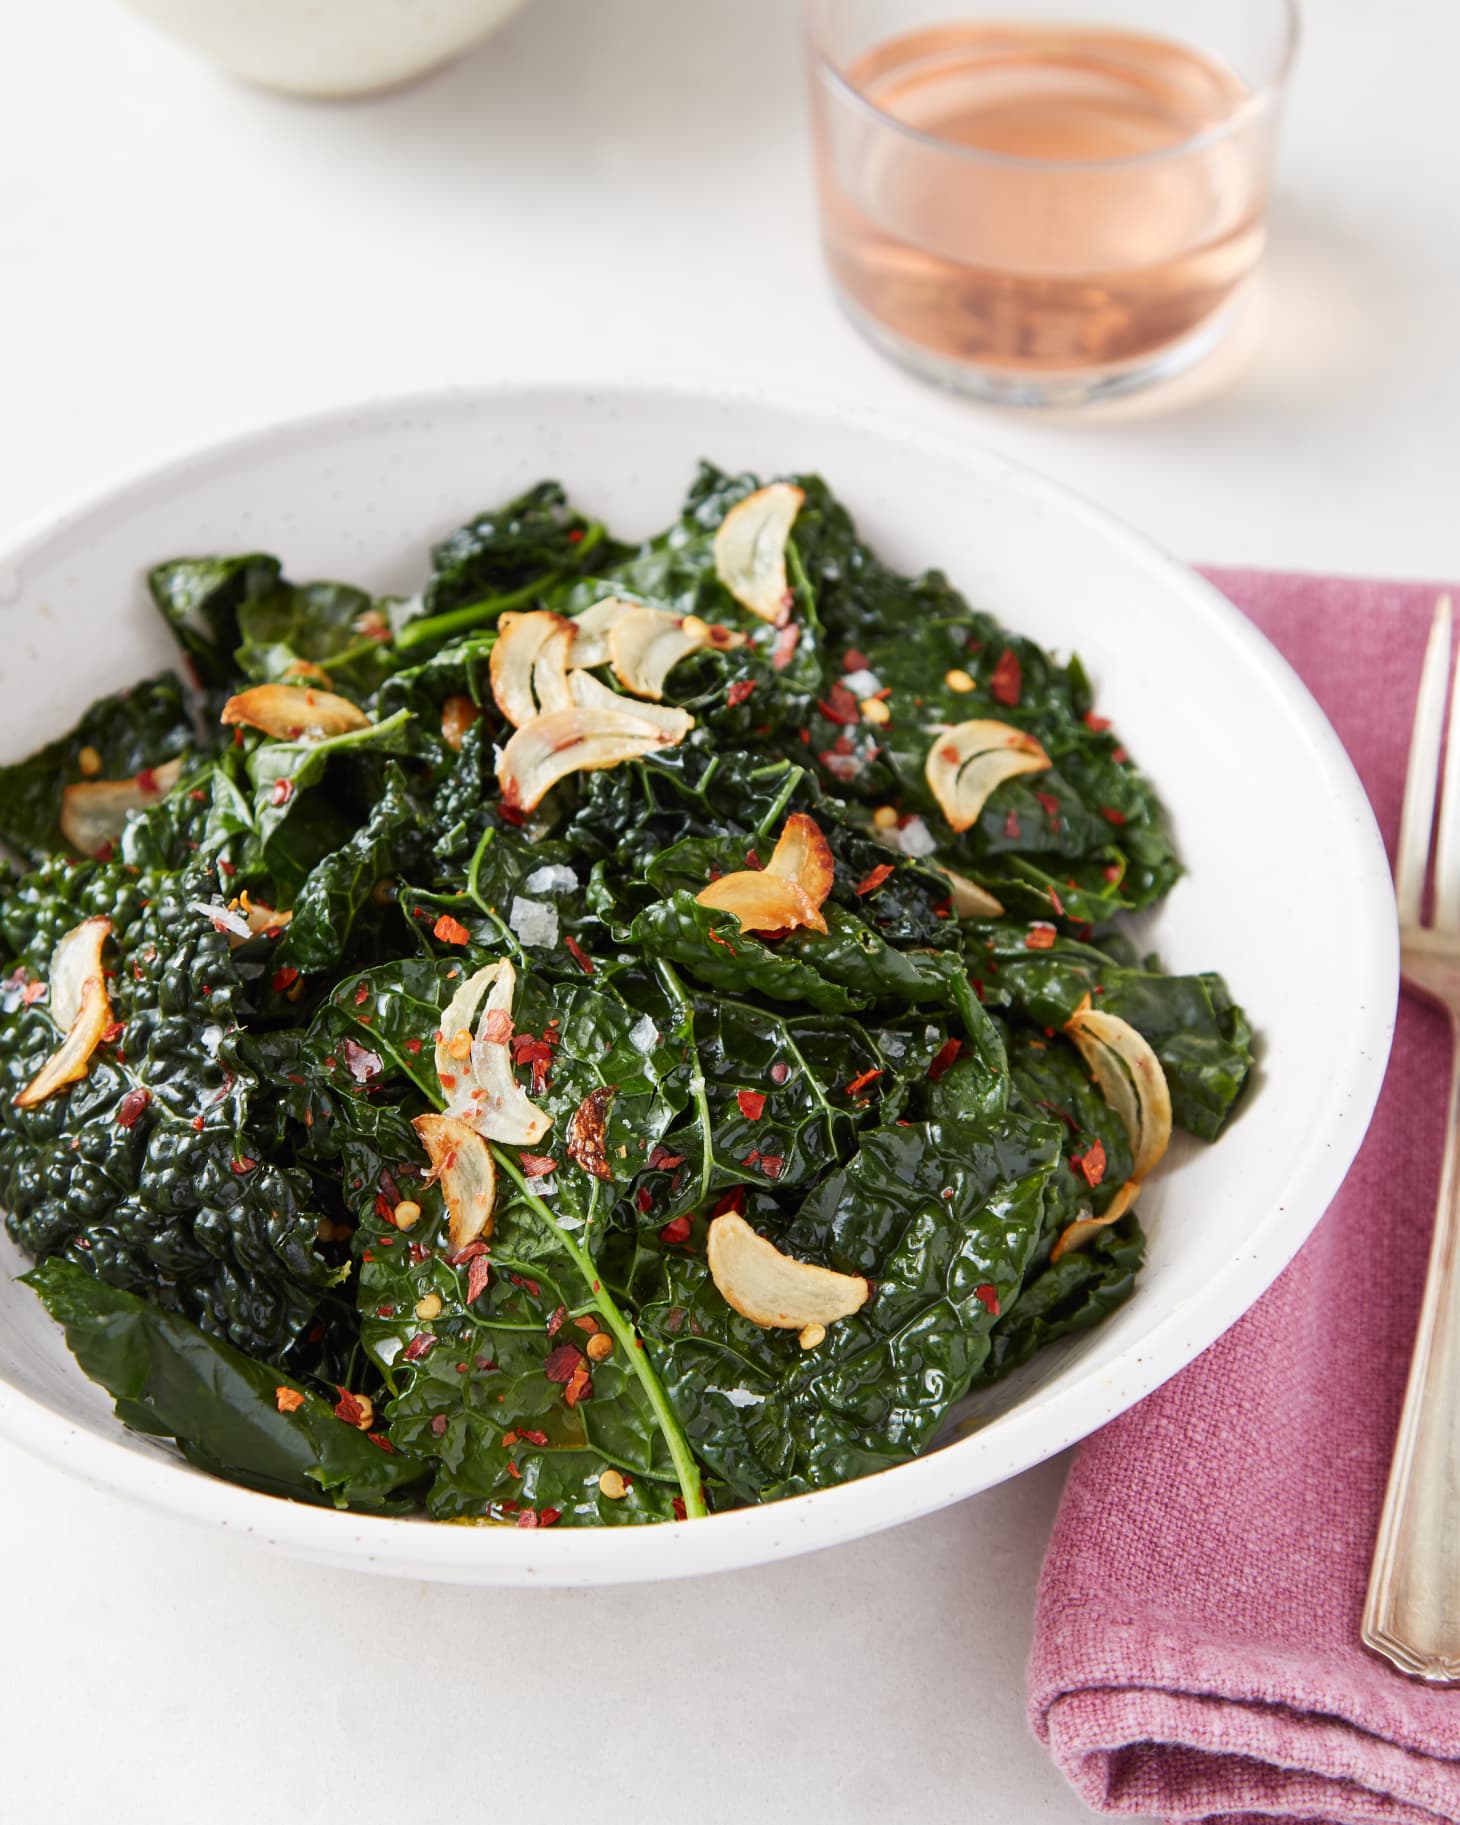 Embrace the Green Queen: Delicious Ways to Enjoy Kale in Your Meals